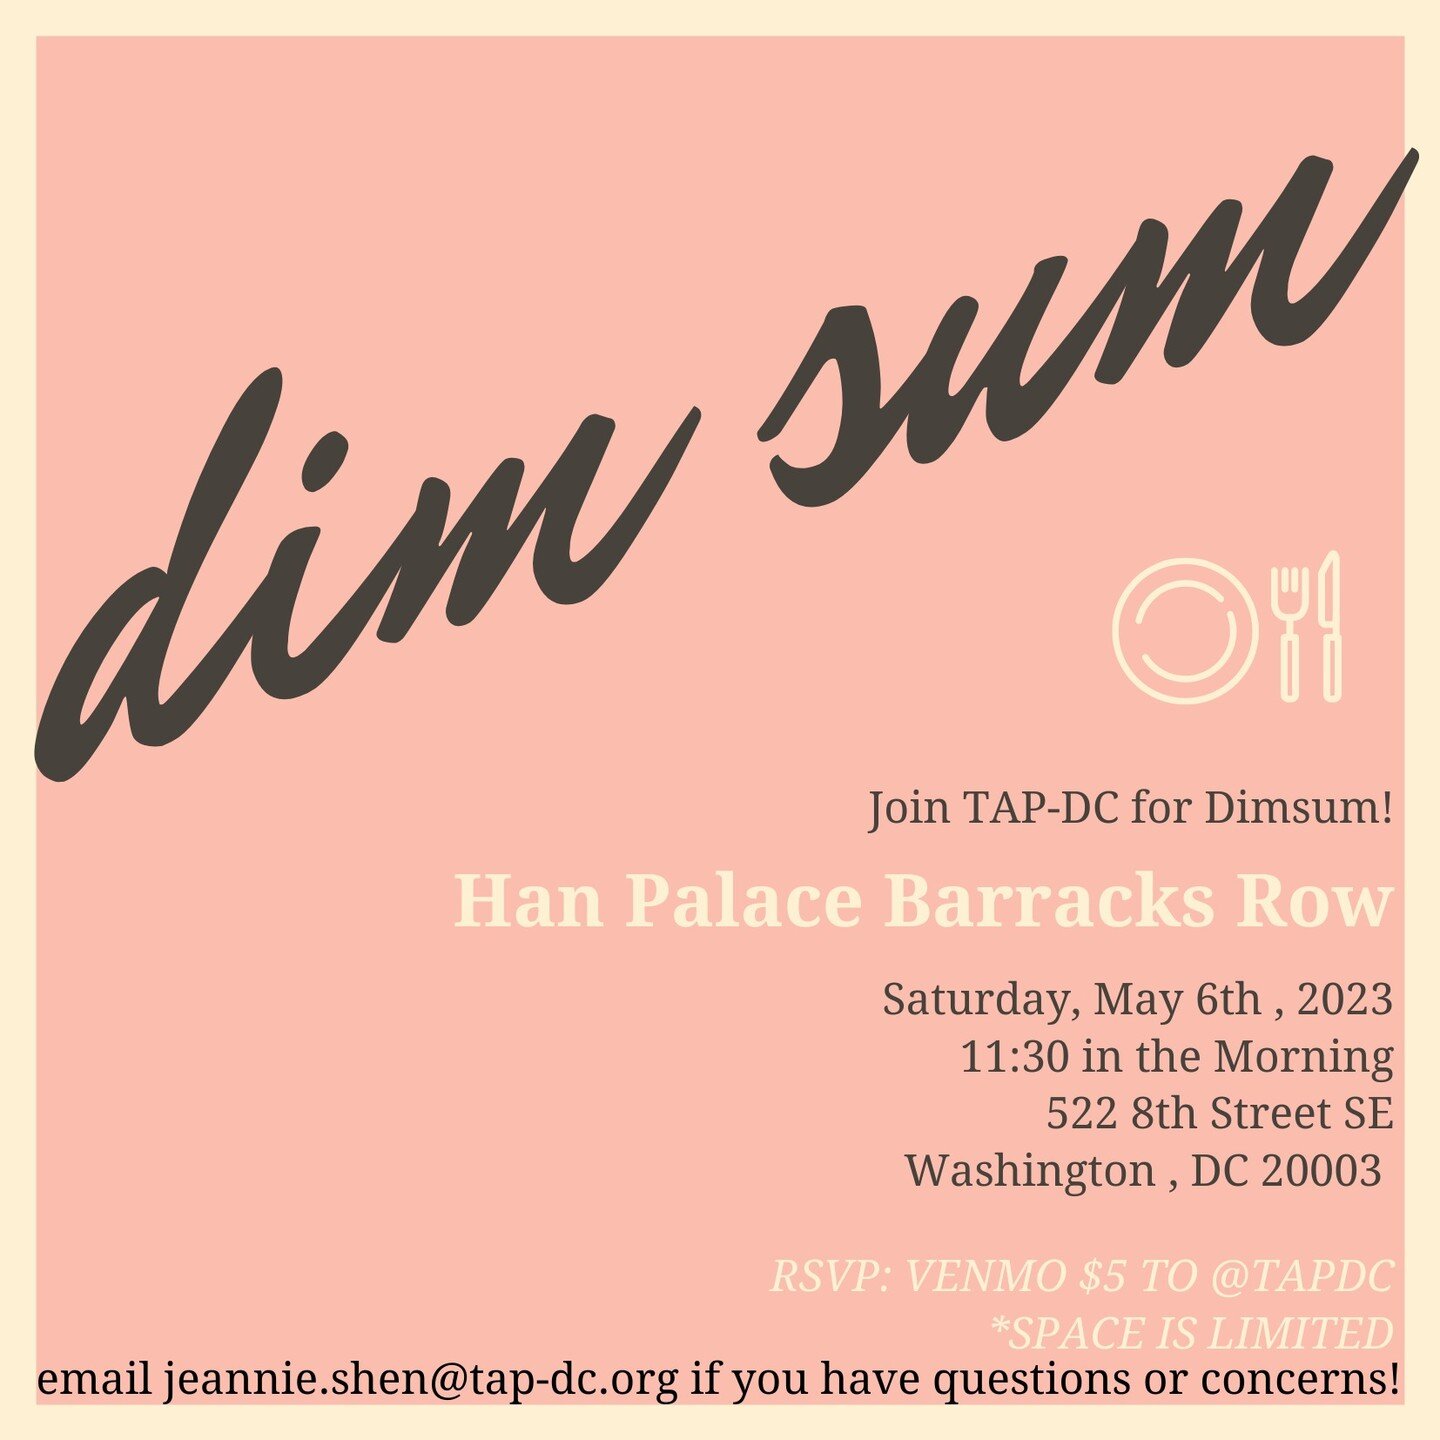 🥢When: Saturday, May 6th 11:30am
🥢Where: Han Palace Barracks Row (522 8th Street SE Washington, DC 20003)
🥢RSVP: Venmo $5 to TAP-DC at @tapdc with your name and supper club by *Friday, May 5th*. This is to limit no shows. Those who do show up will